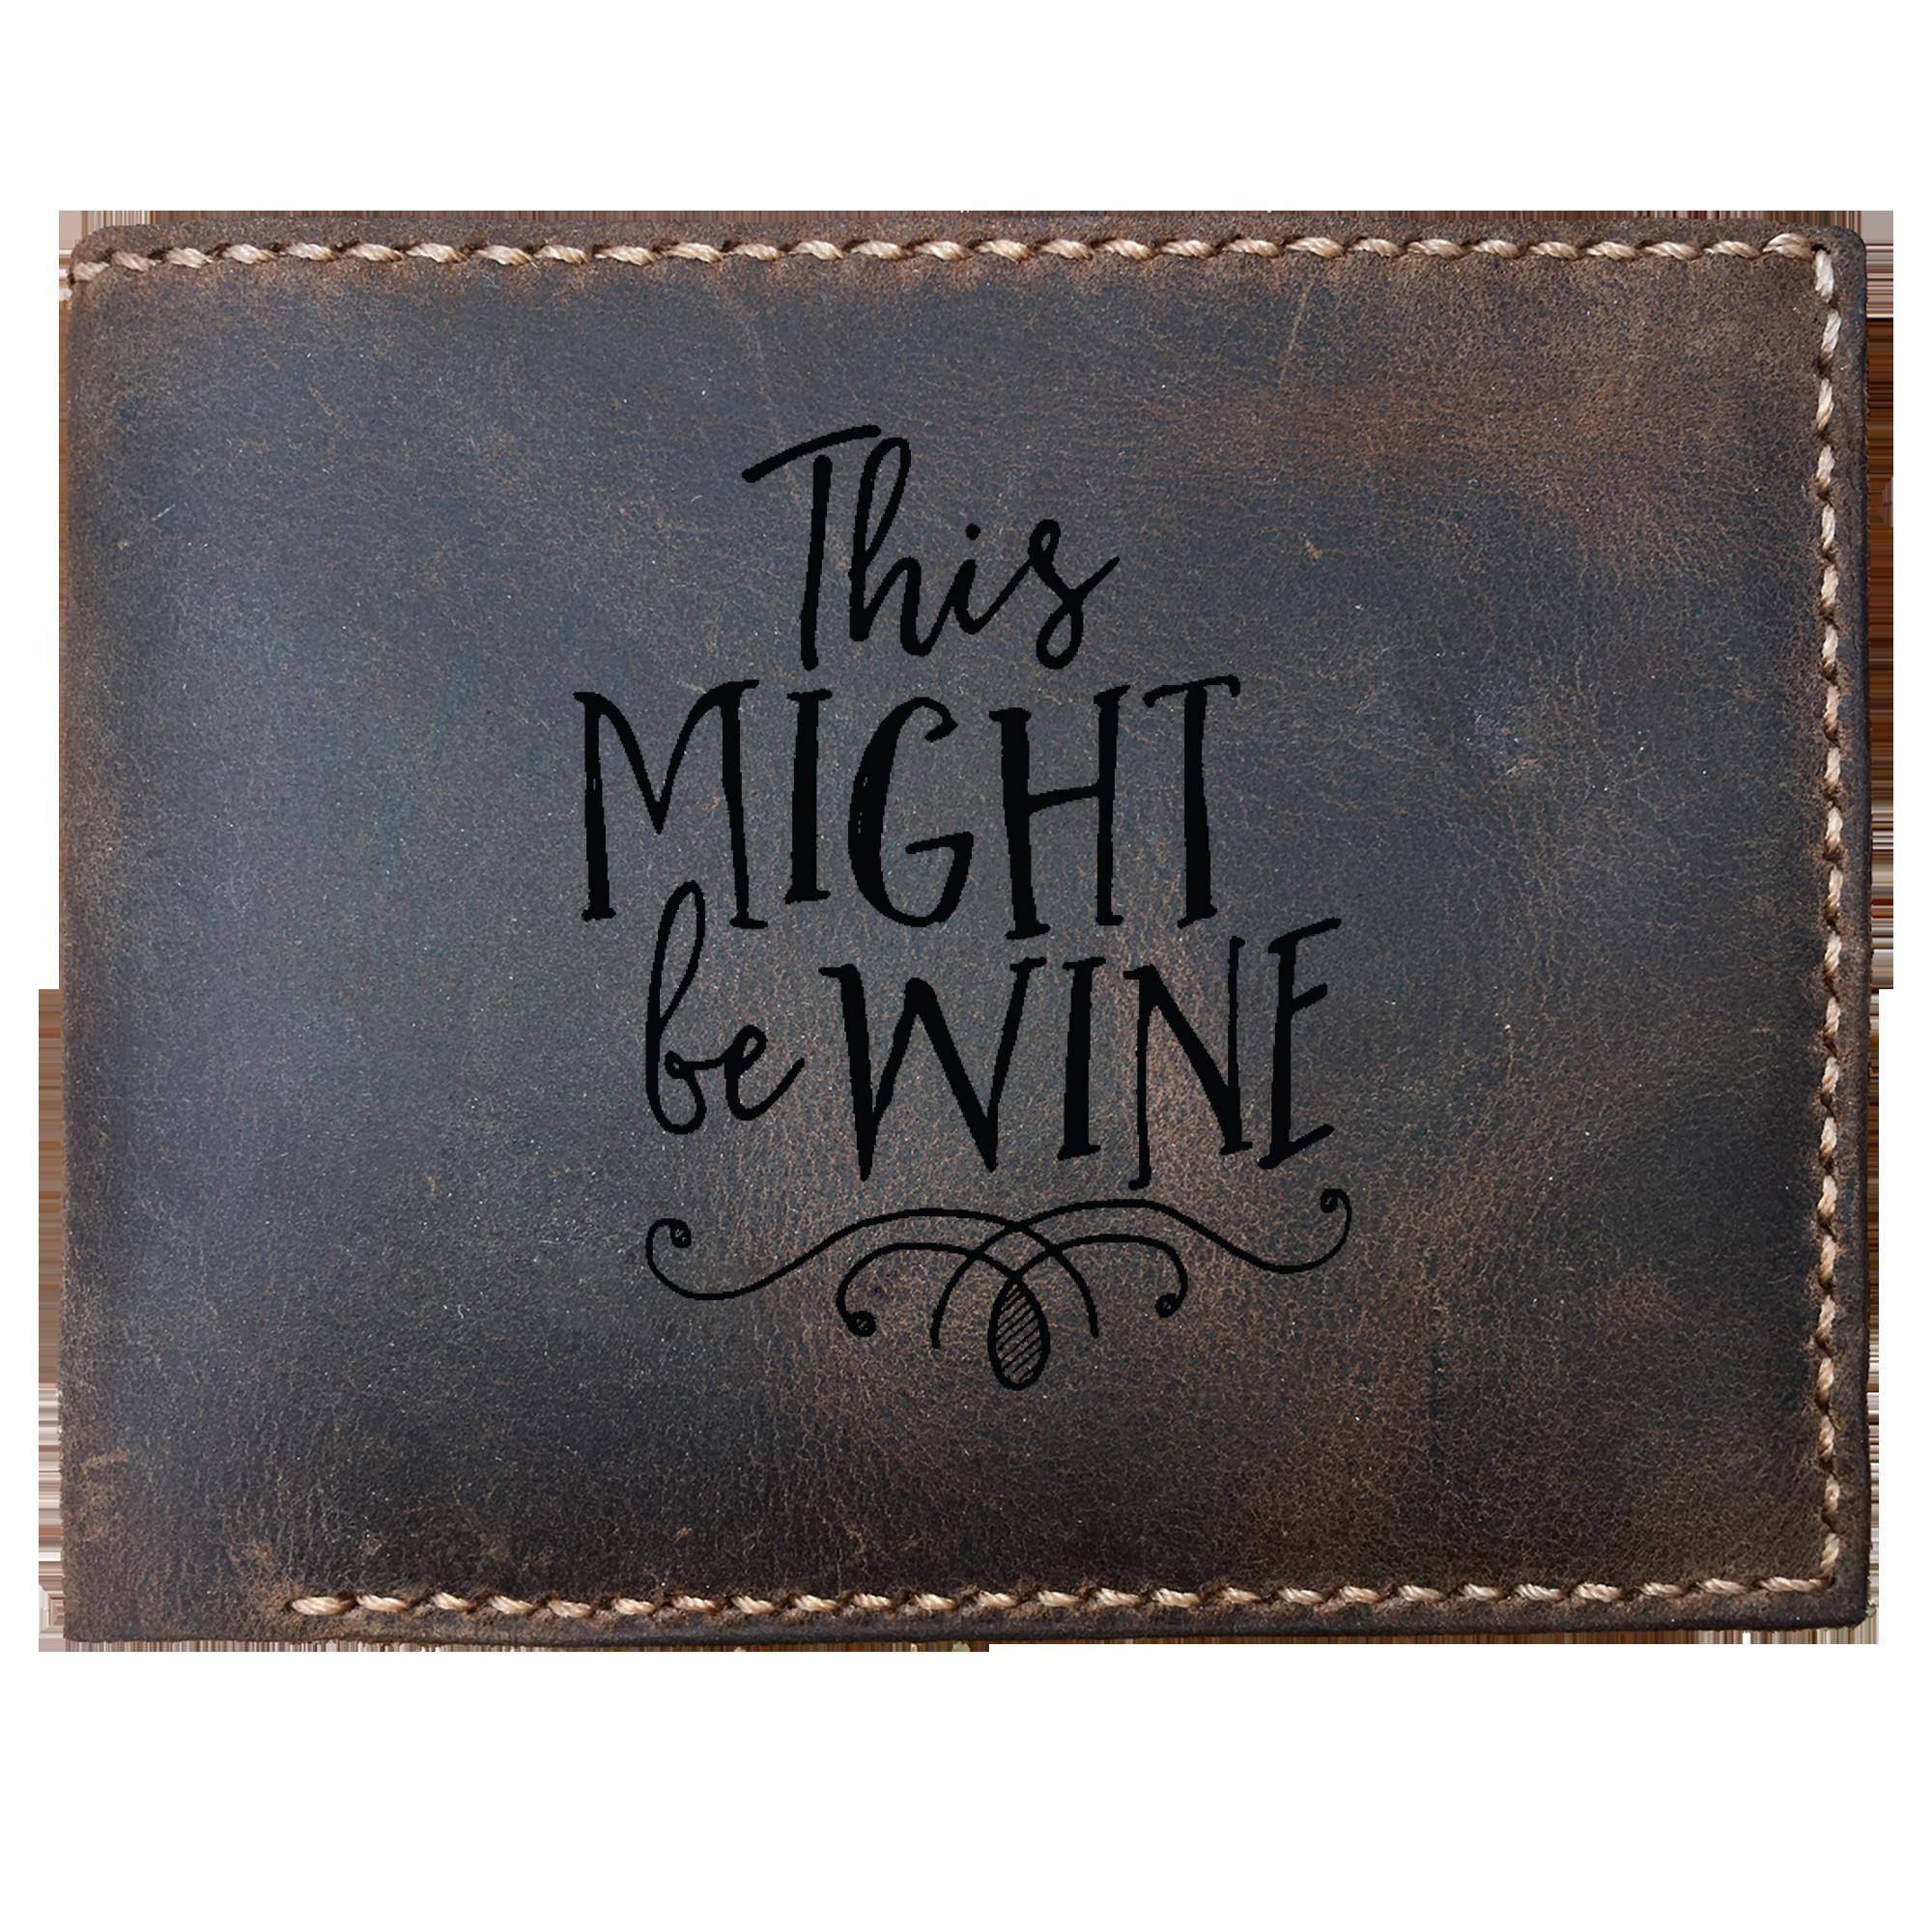 Skitongifts Funny Custom Laser Engraved Bifold Leather Wallet For Men, This Might Be Wine